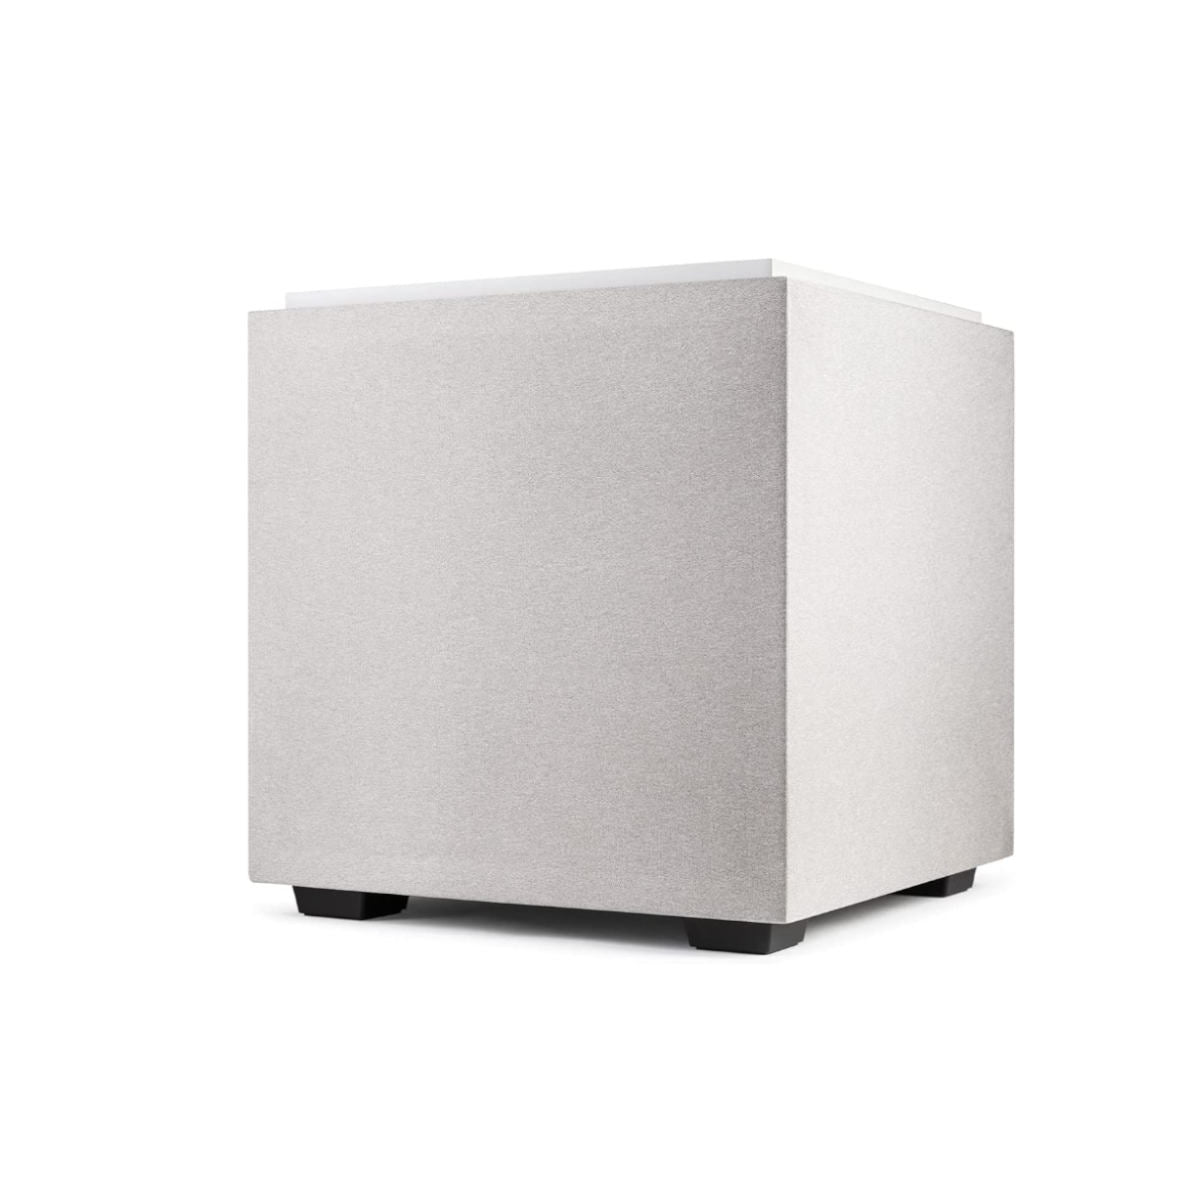 Definitive Technology Descend Series DN10 10” Subwoofer (Glacier White) - Ooberpad India